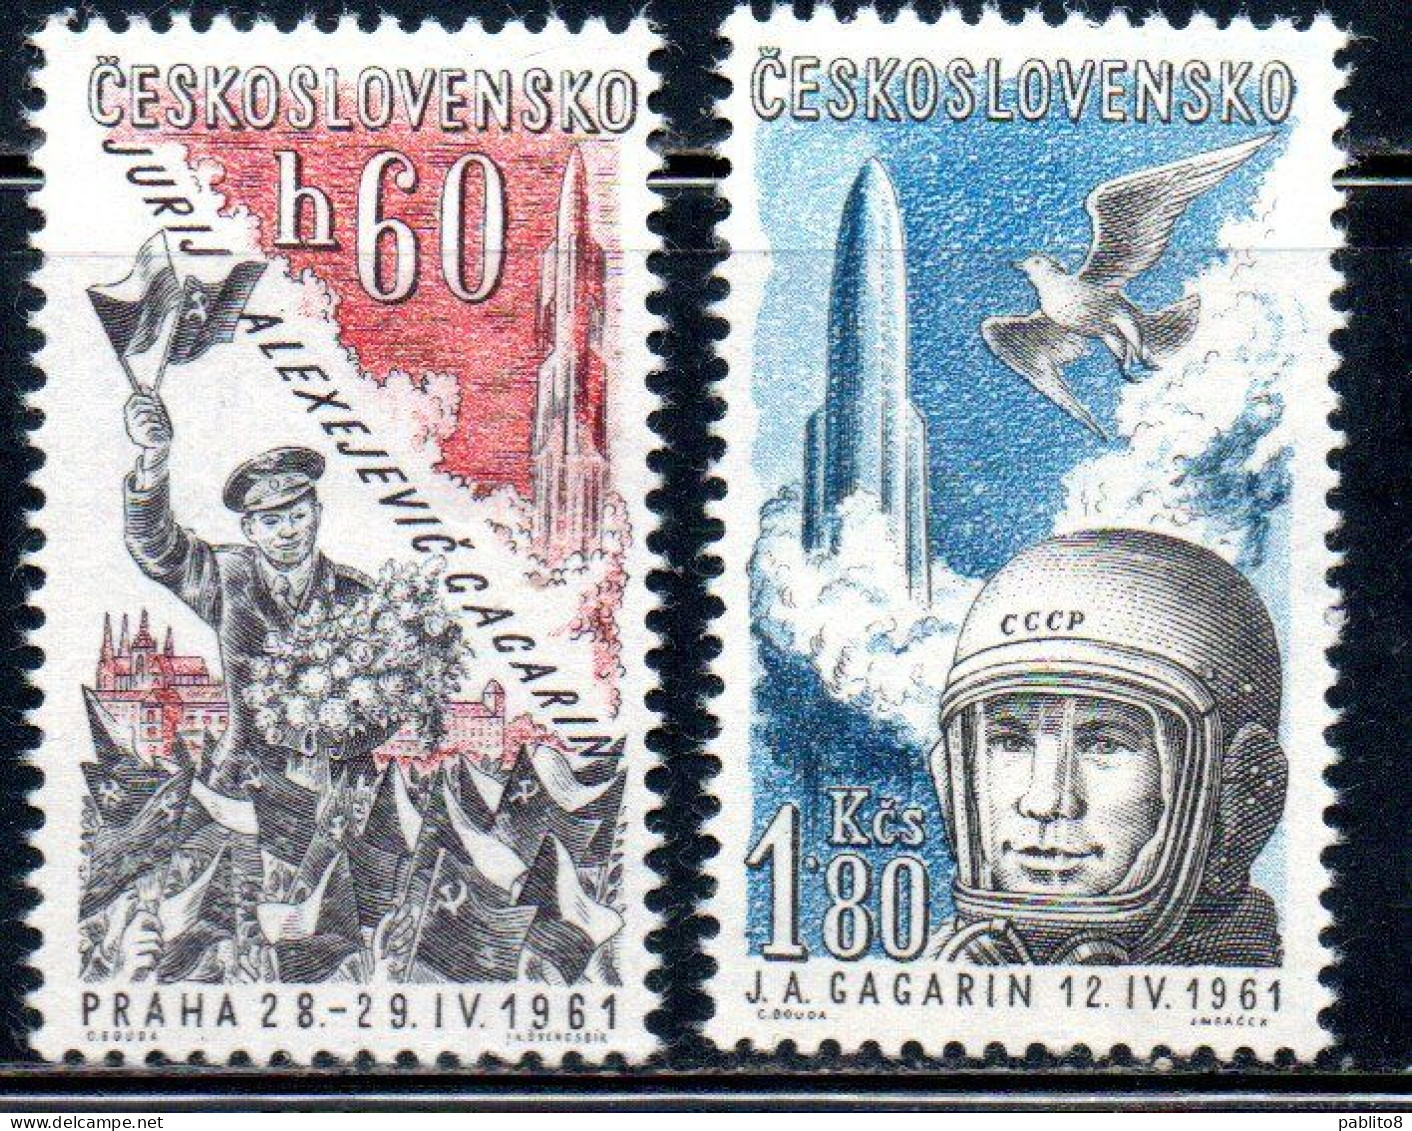 CZECHOSLOVAKIA CECOSLOVACCHIA 1961 AIR POST MAIL AIRMAIL COMMEMORATES MAY GAGARIN' VISIT COMPLETE SET SERIE COMPLETA MNH - Airmail